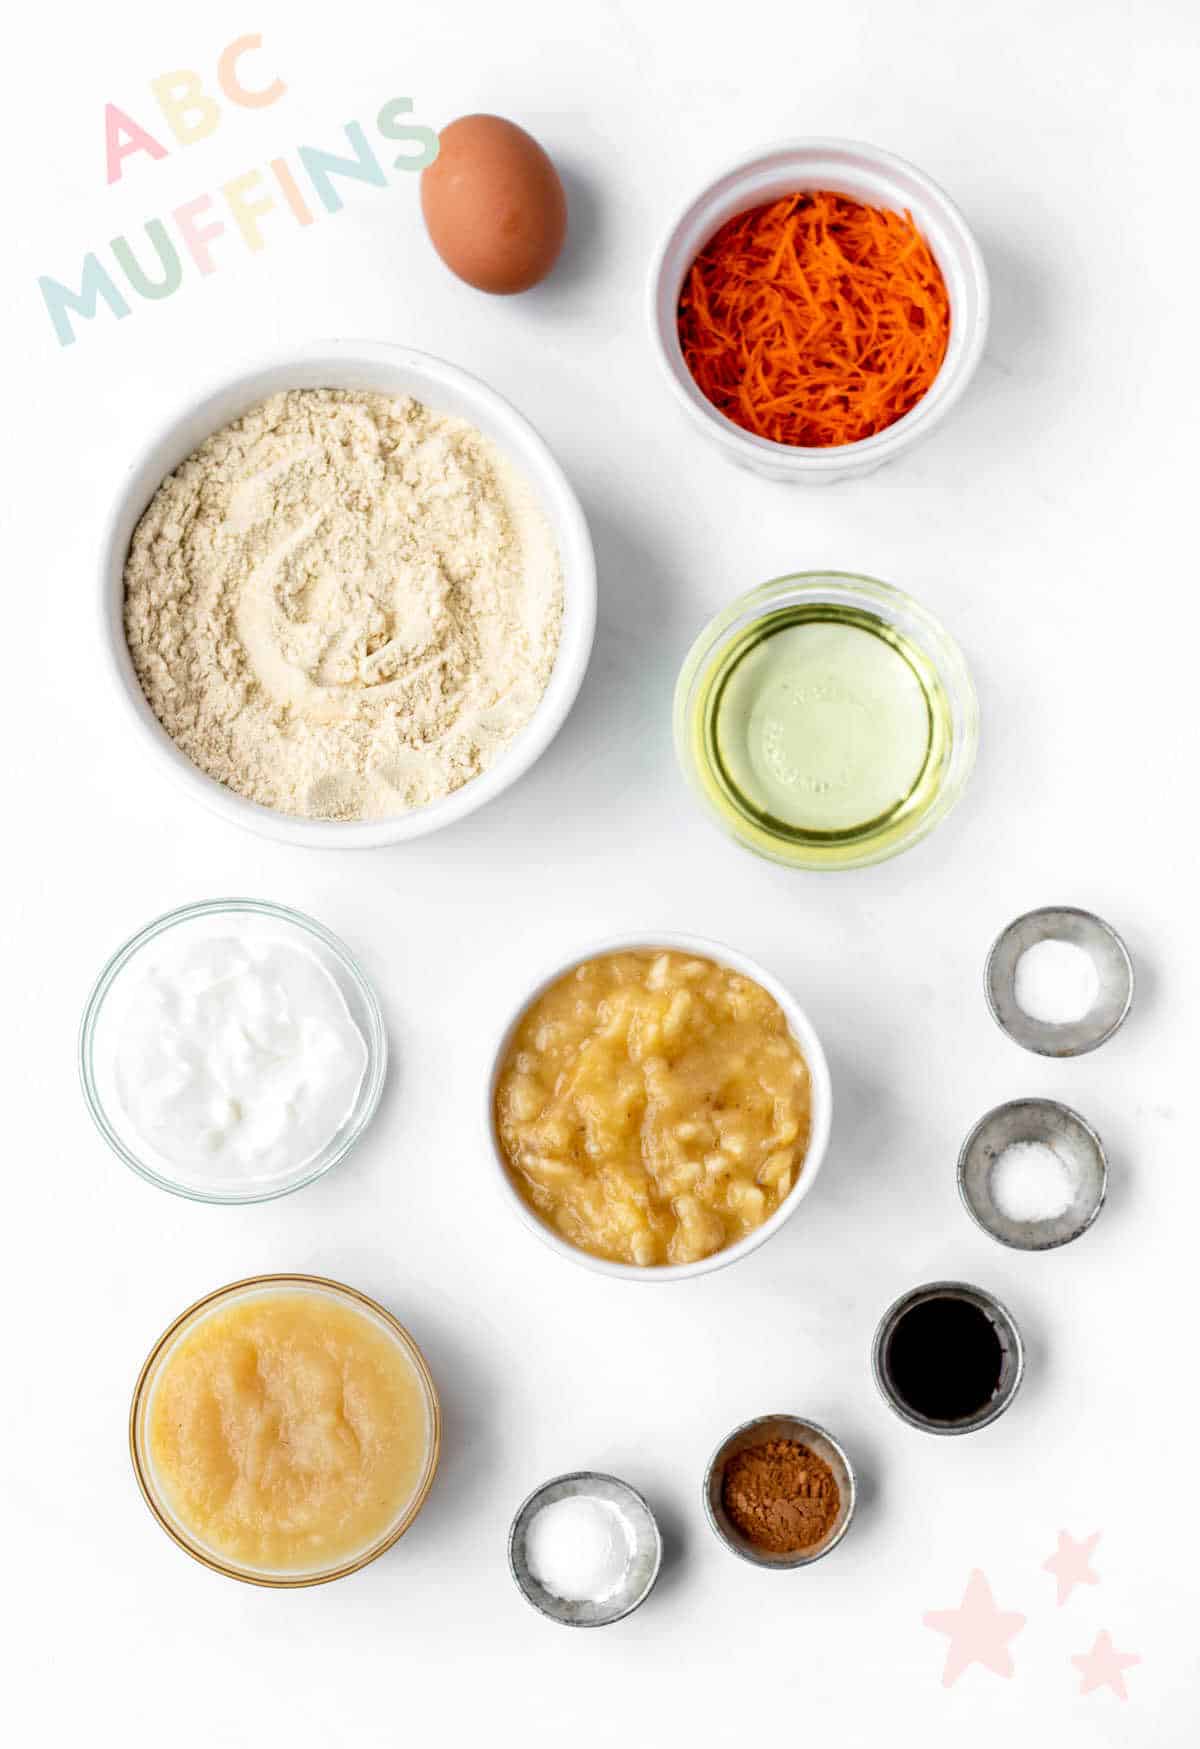 Ingredients required for abc muffins recipe.